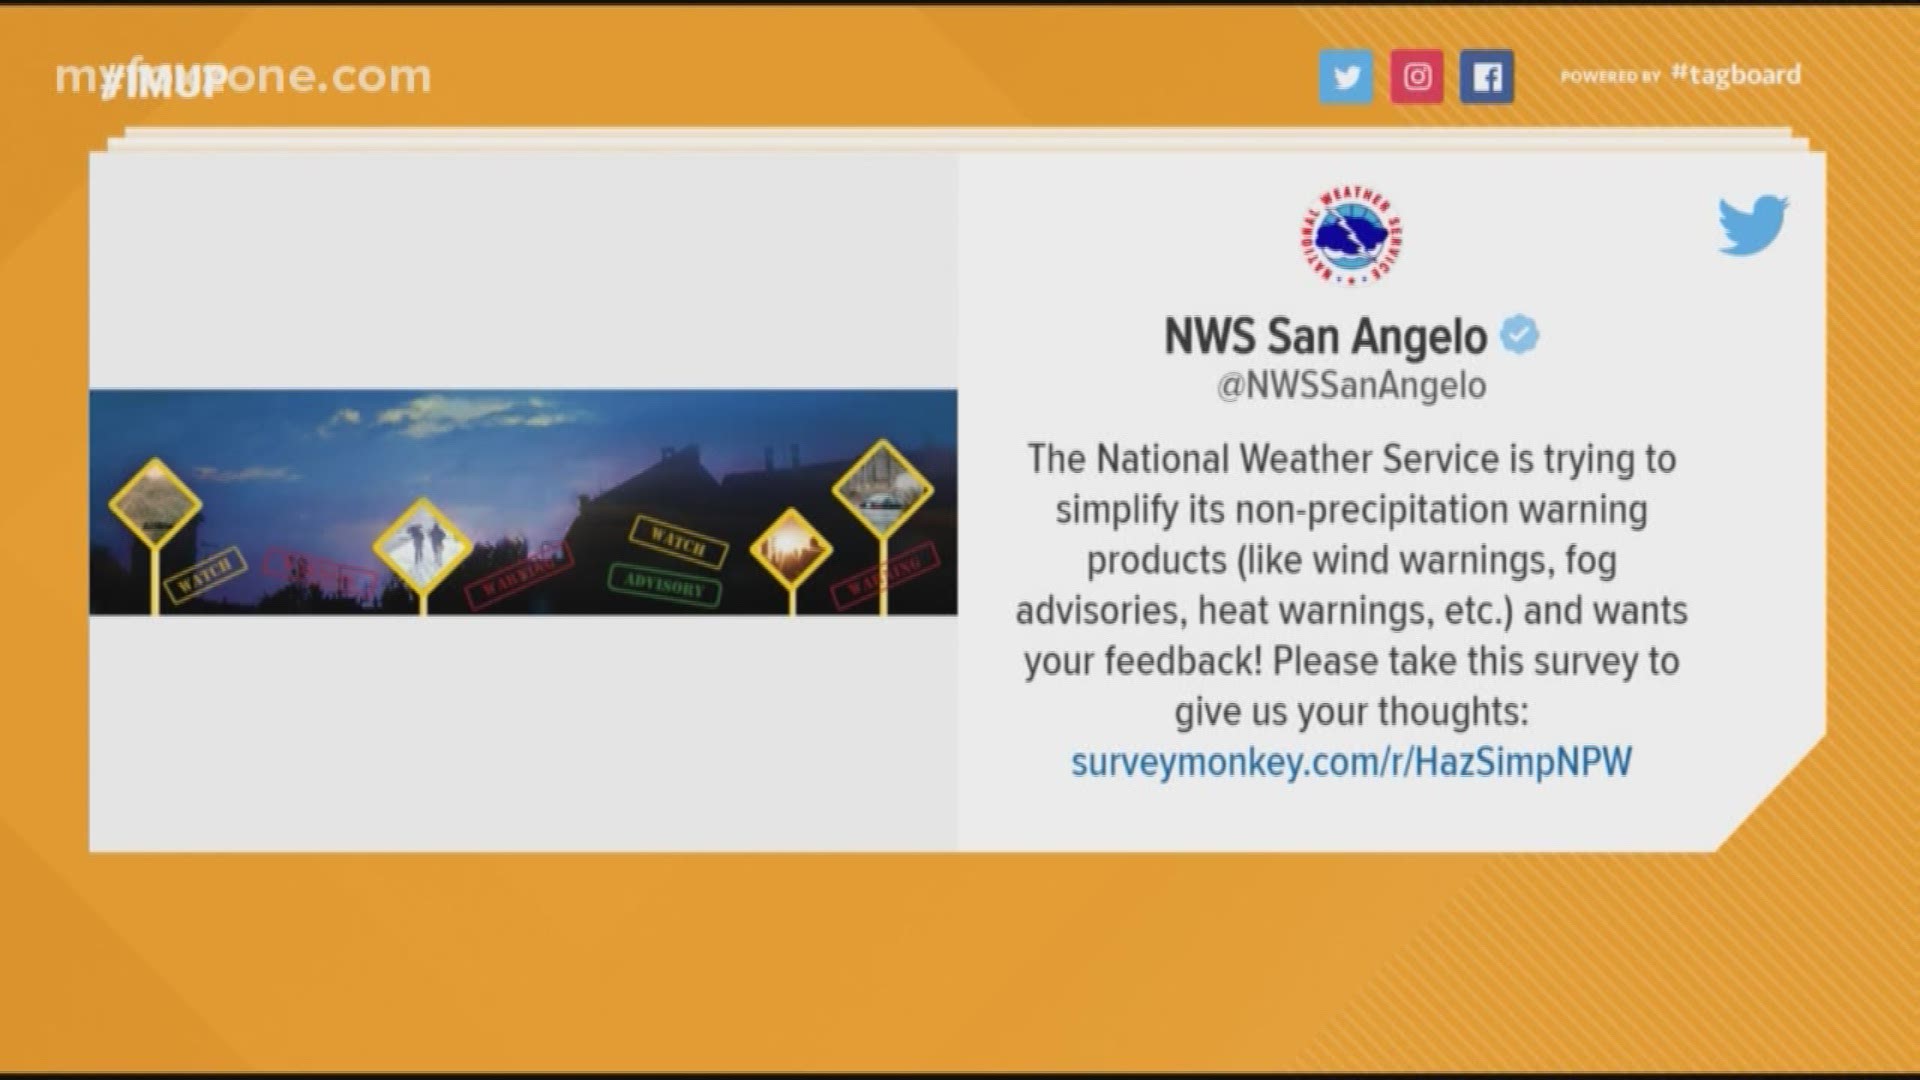 The National Weather Service is looking to simply their more than 120 weather watches, warnings and advisories. 